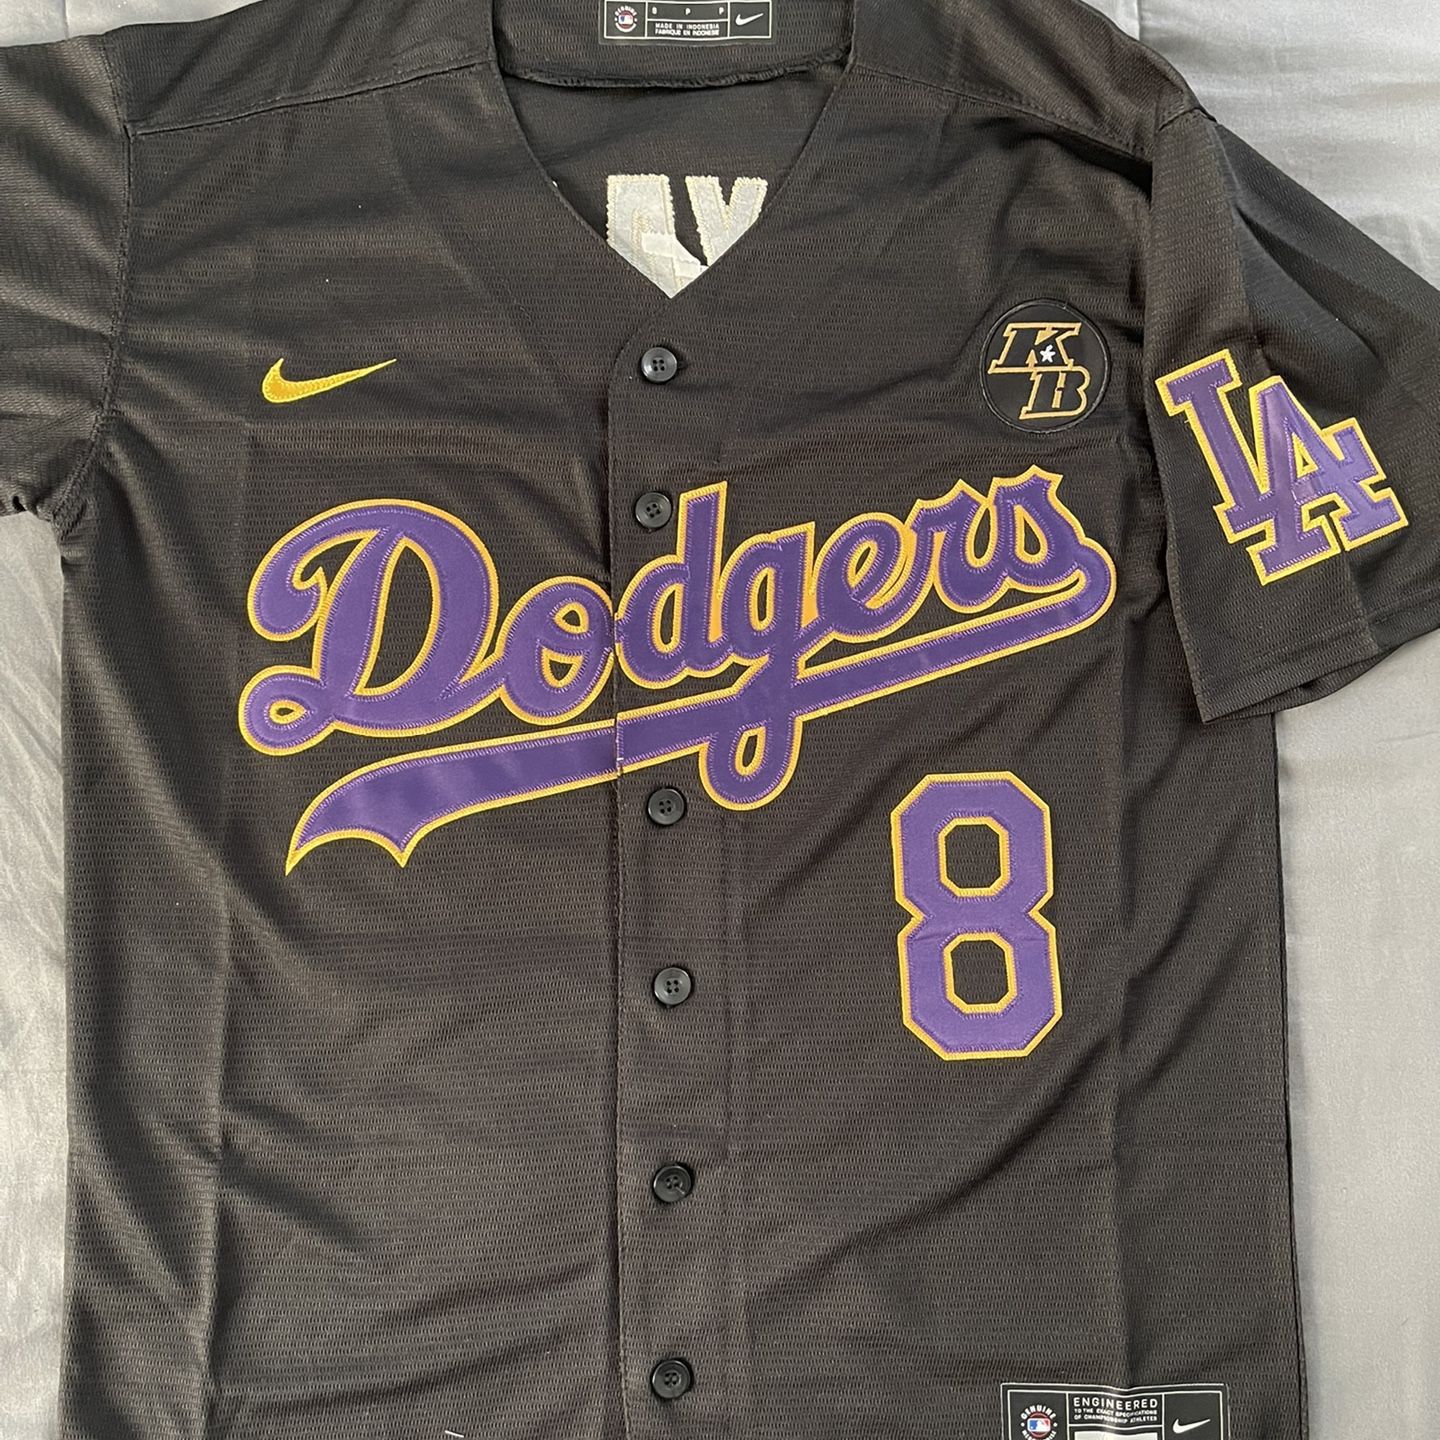 KOBE BRYANT LA LAKERS LIMITED EDITION SNAKESKIN ACCENTED COMMEMORATIVE  SWINGMAN JERSEY for Sale in Mission Viejo, CA - OfferUp